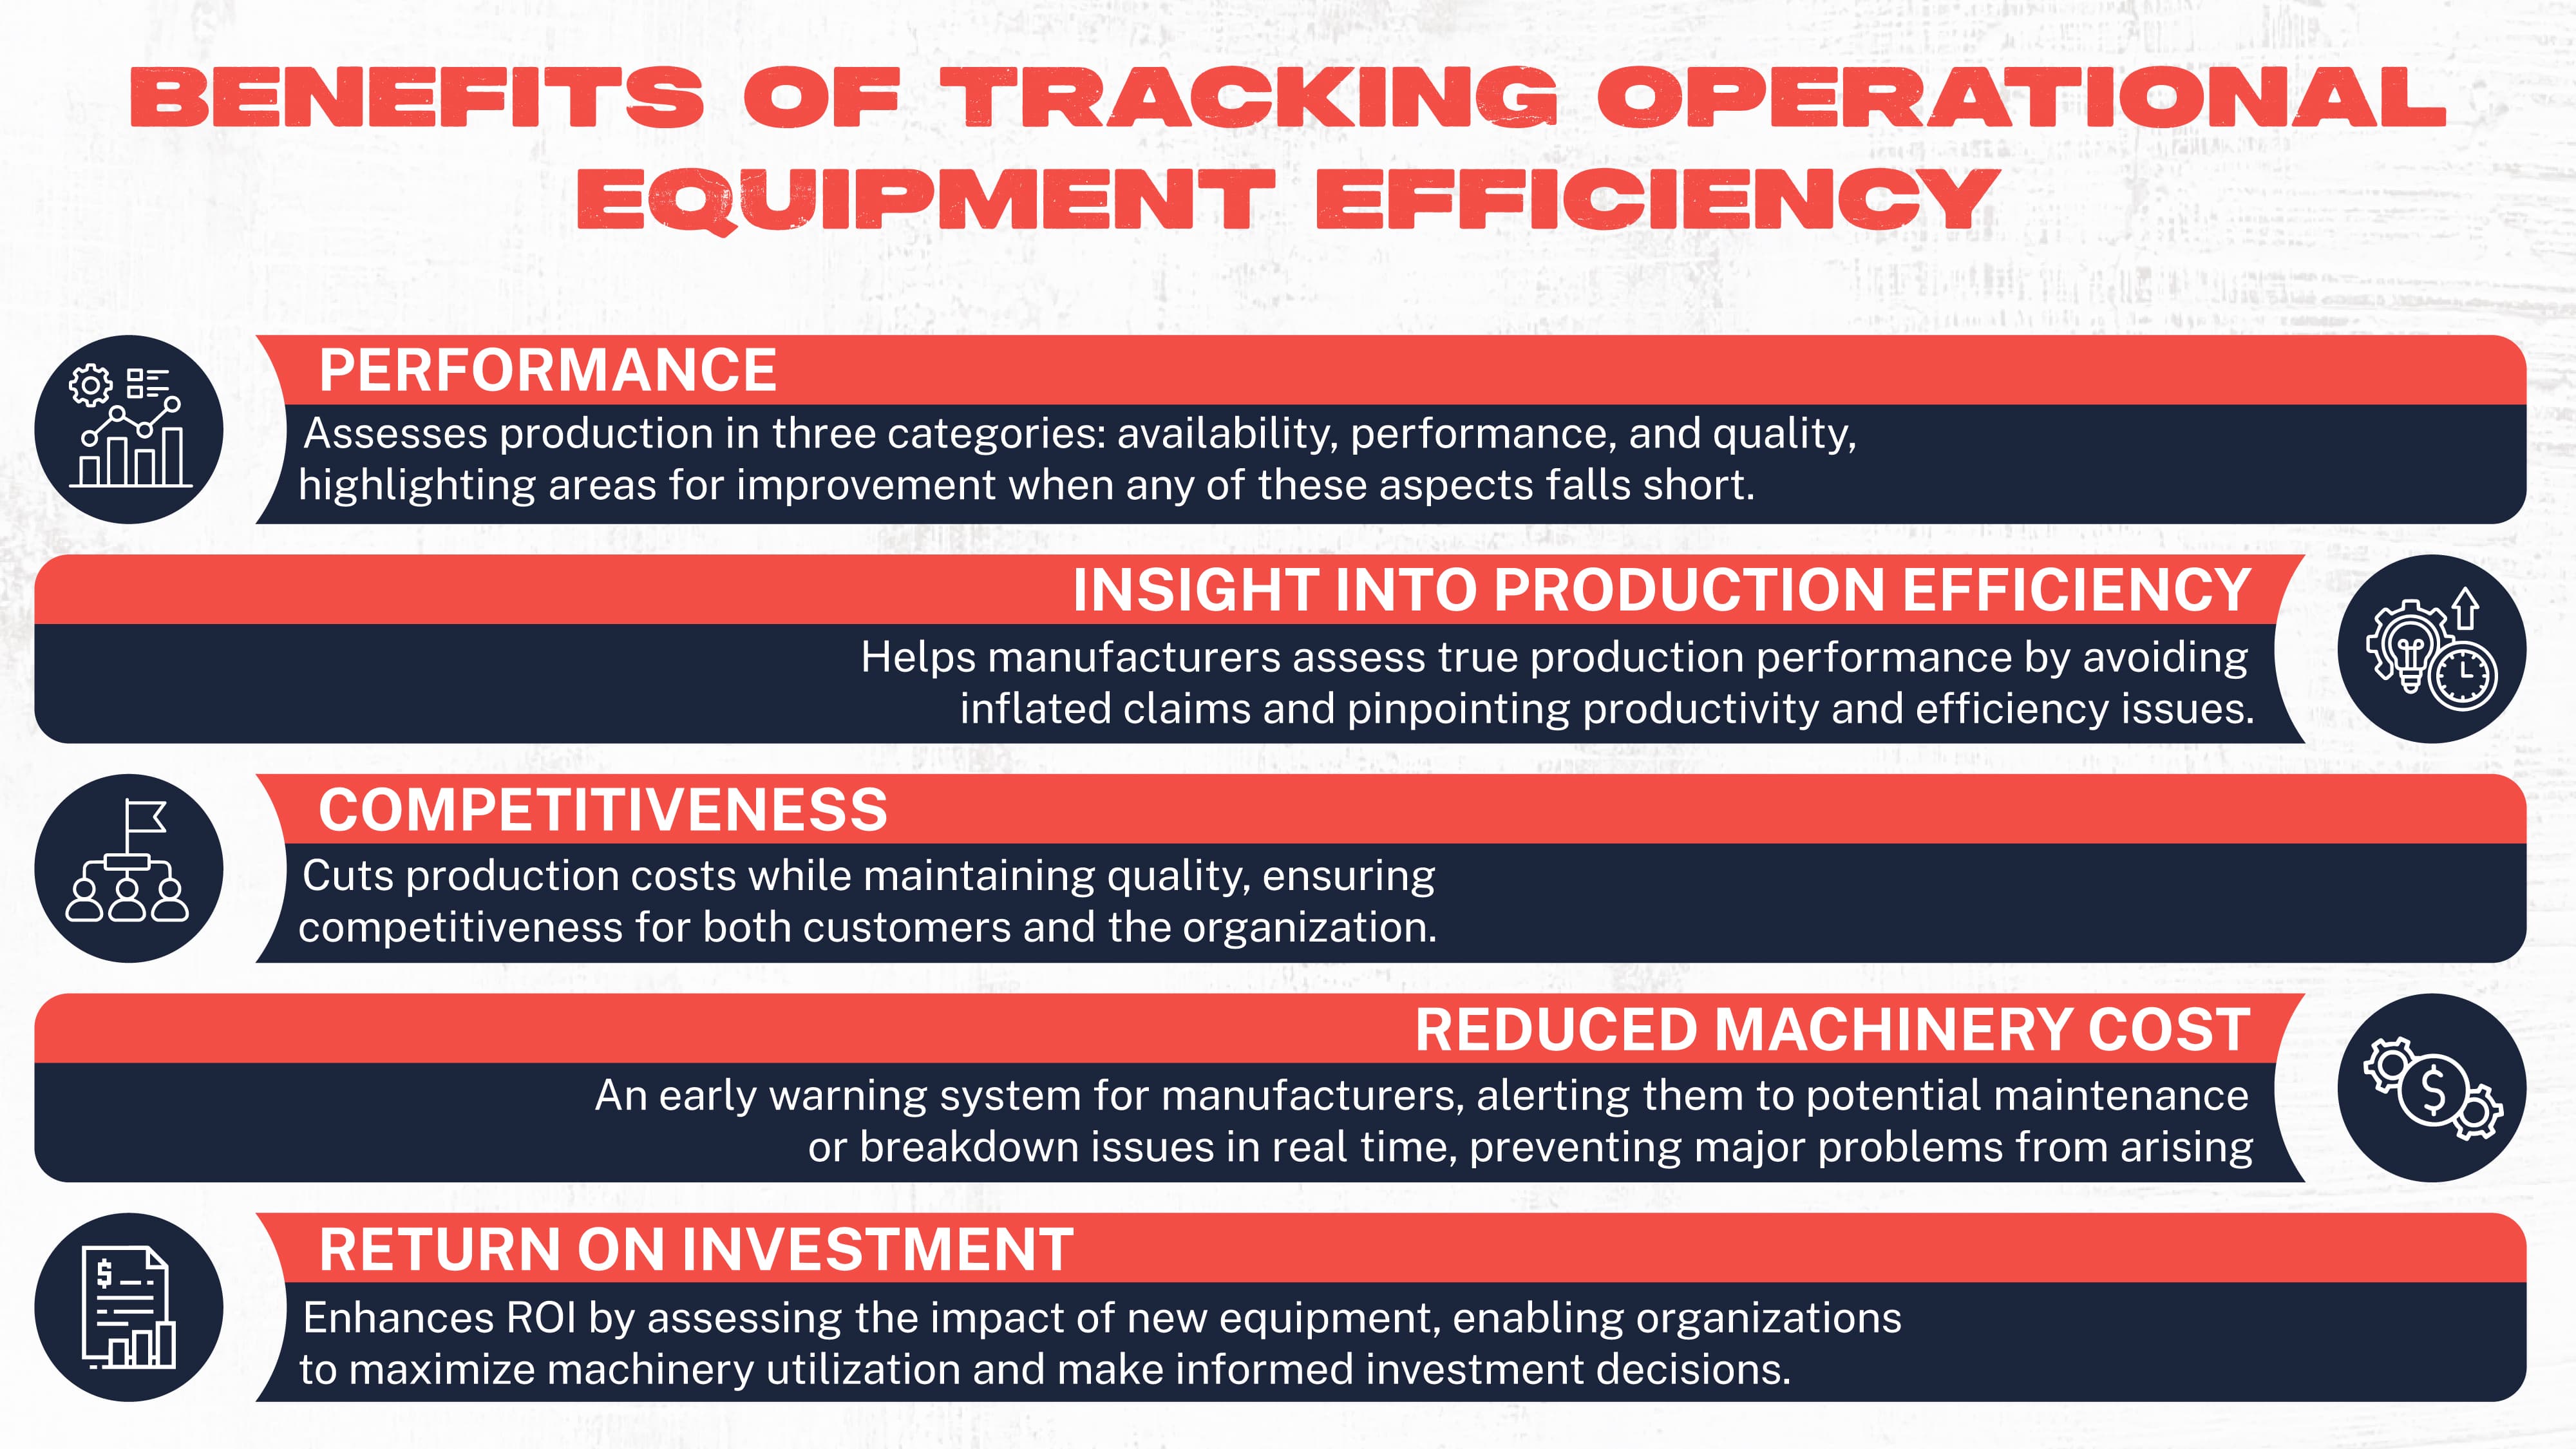 3 Benefits of Tracking Operational Equipment Efficiency